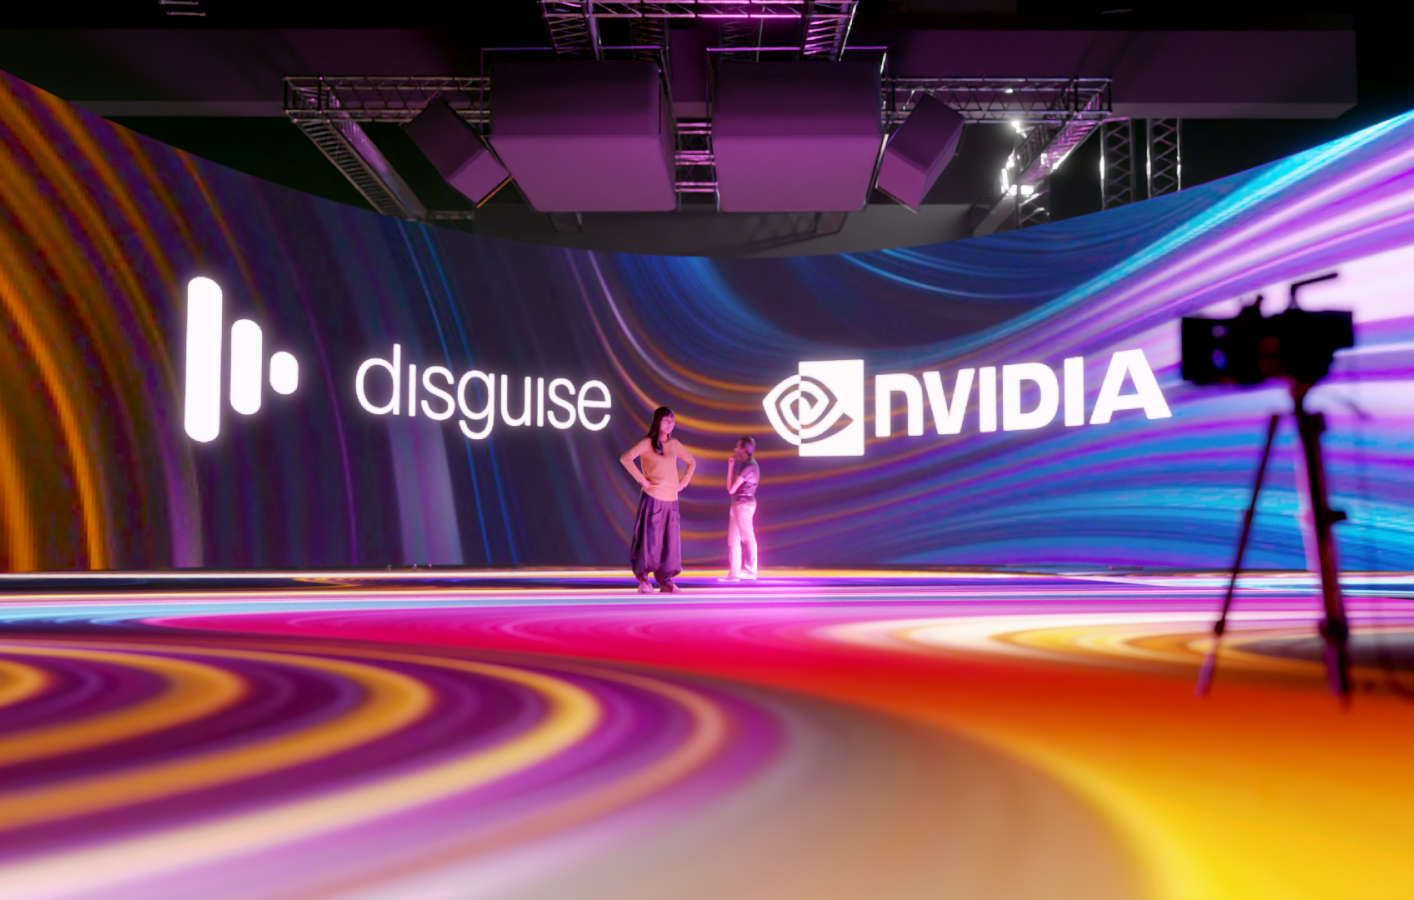 disguise announces collaboration with NVIDIA